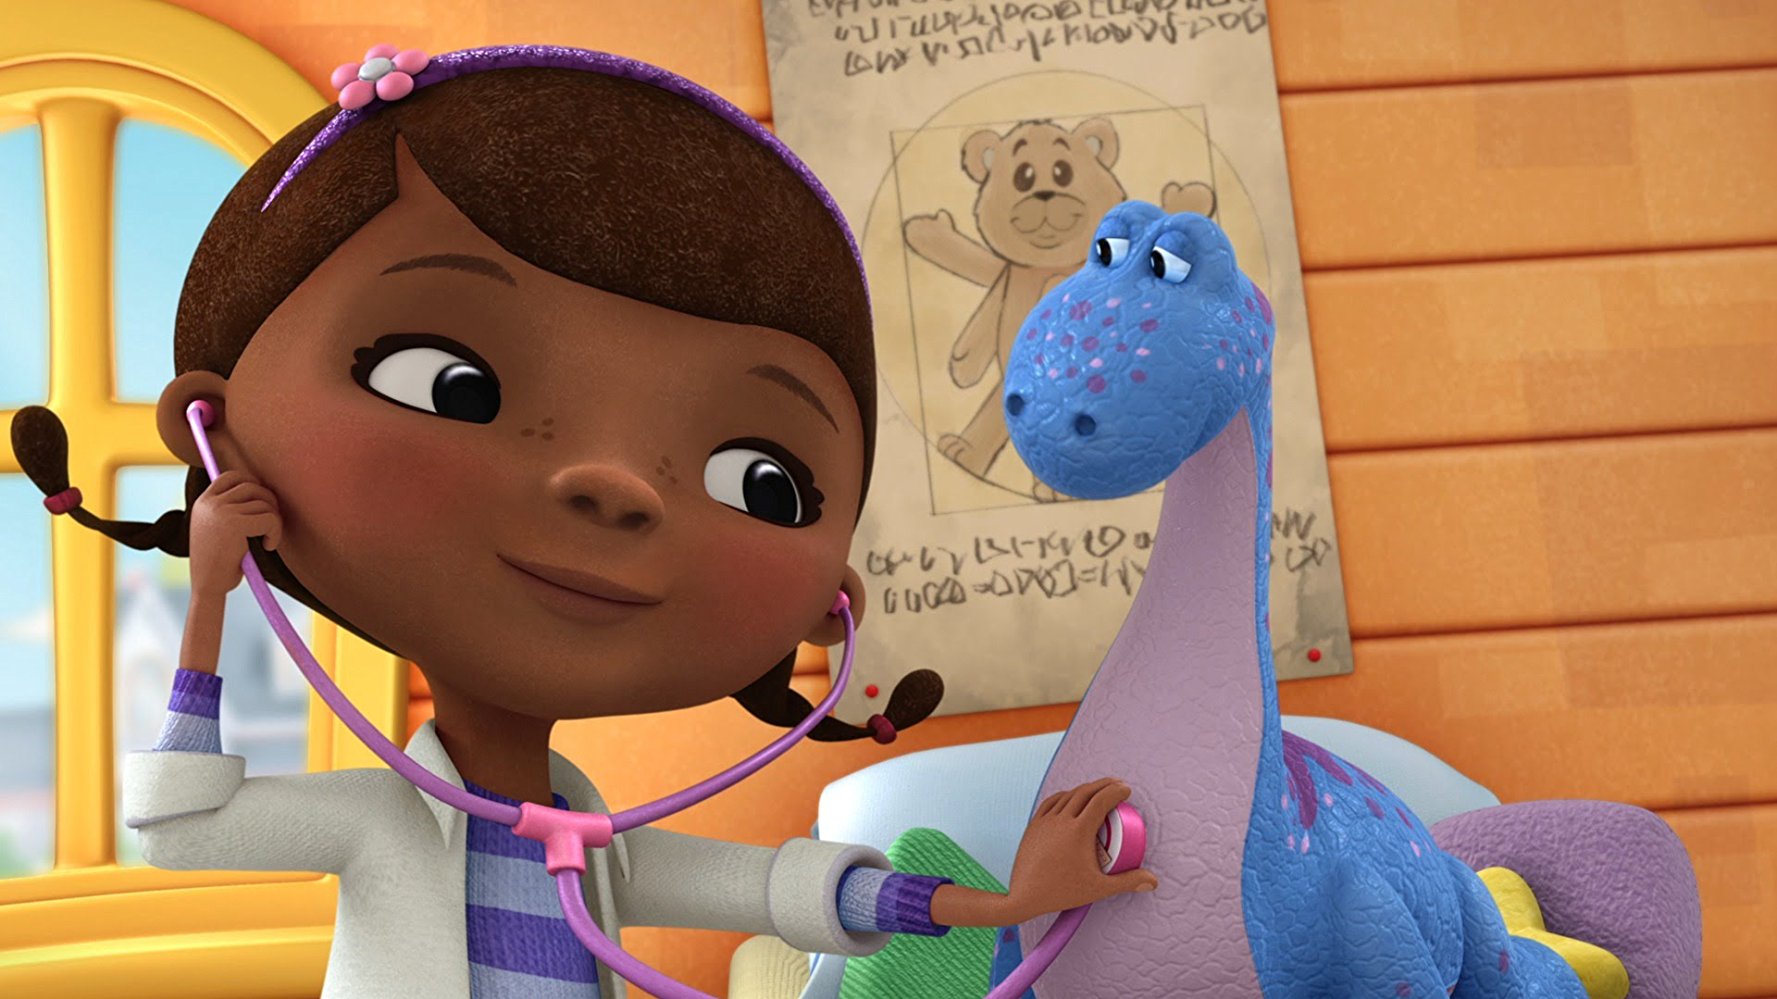 All about Doc McStuffins on Tornado Movies! List of films with a